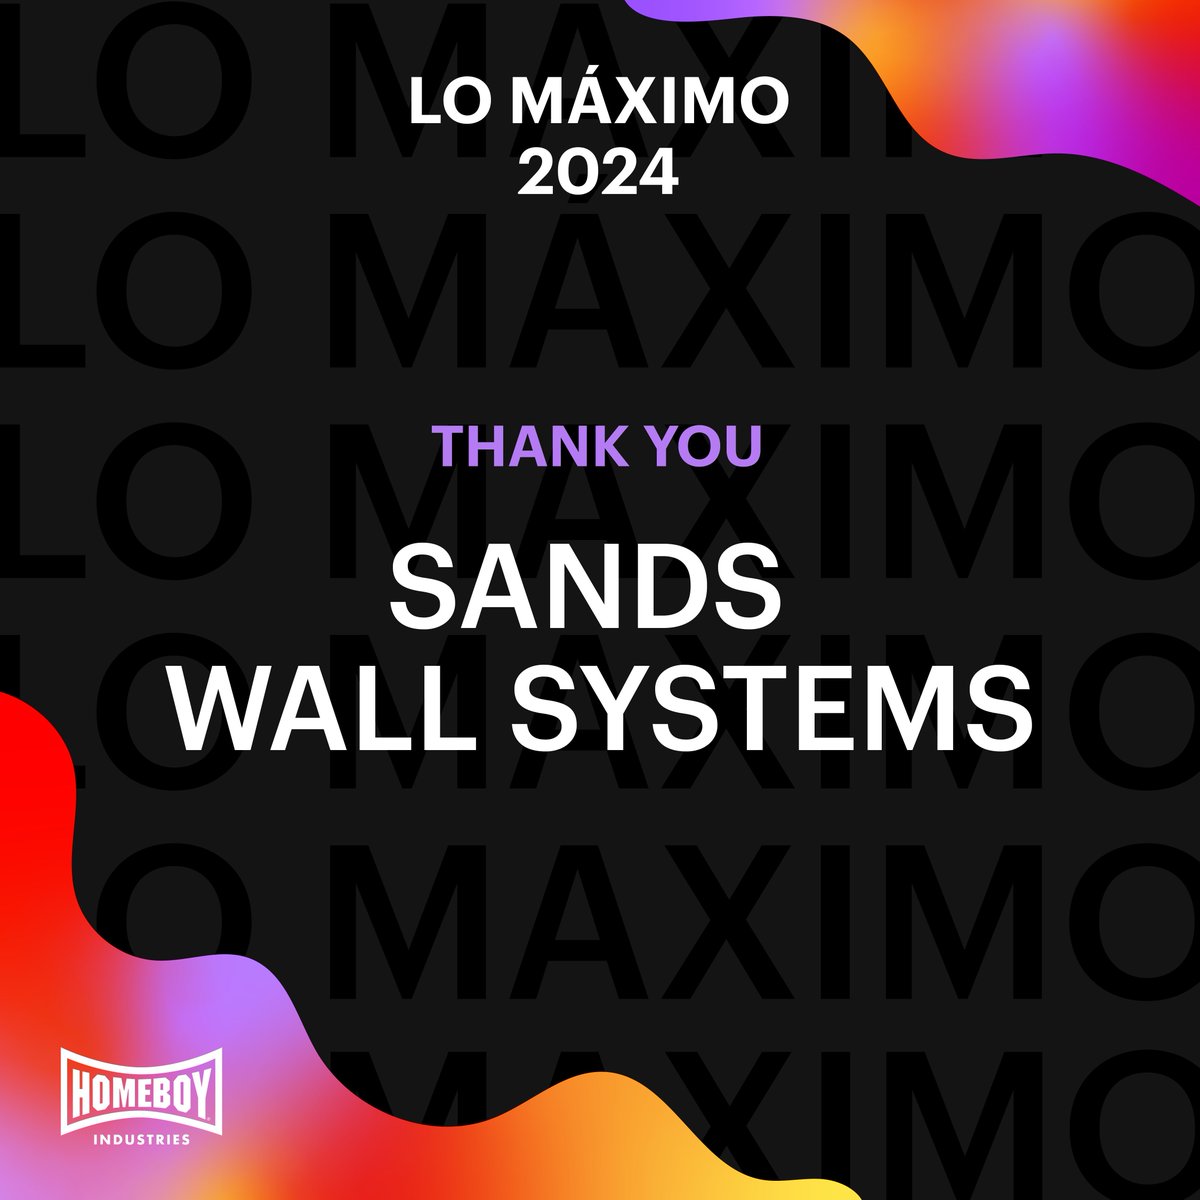 We're beyond grateful for the support of Sands Wall Systems! Thank you for your incredible generosity and support. You make our work possible!